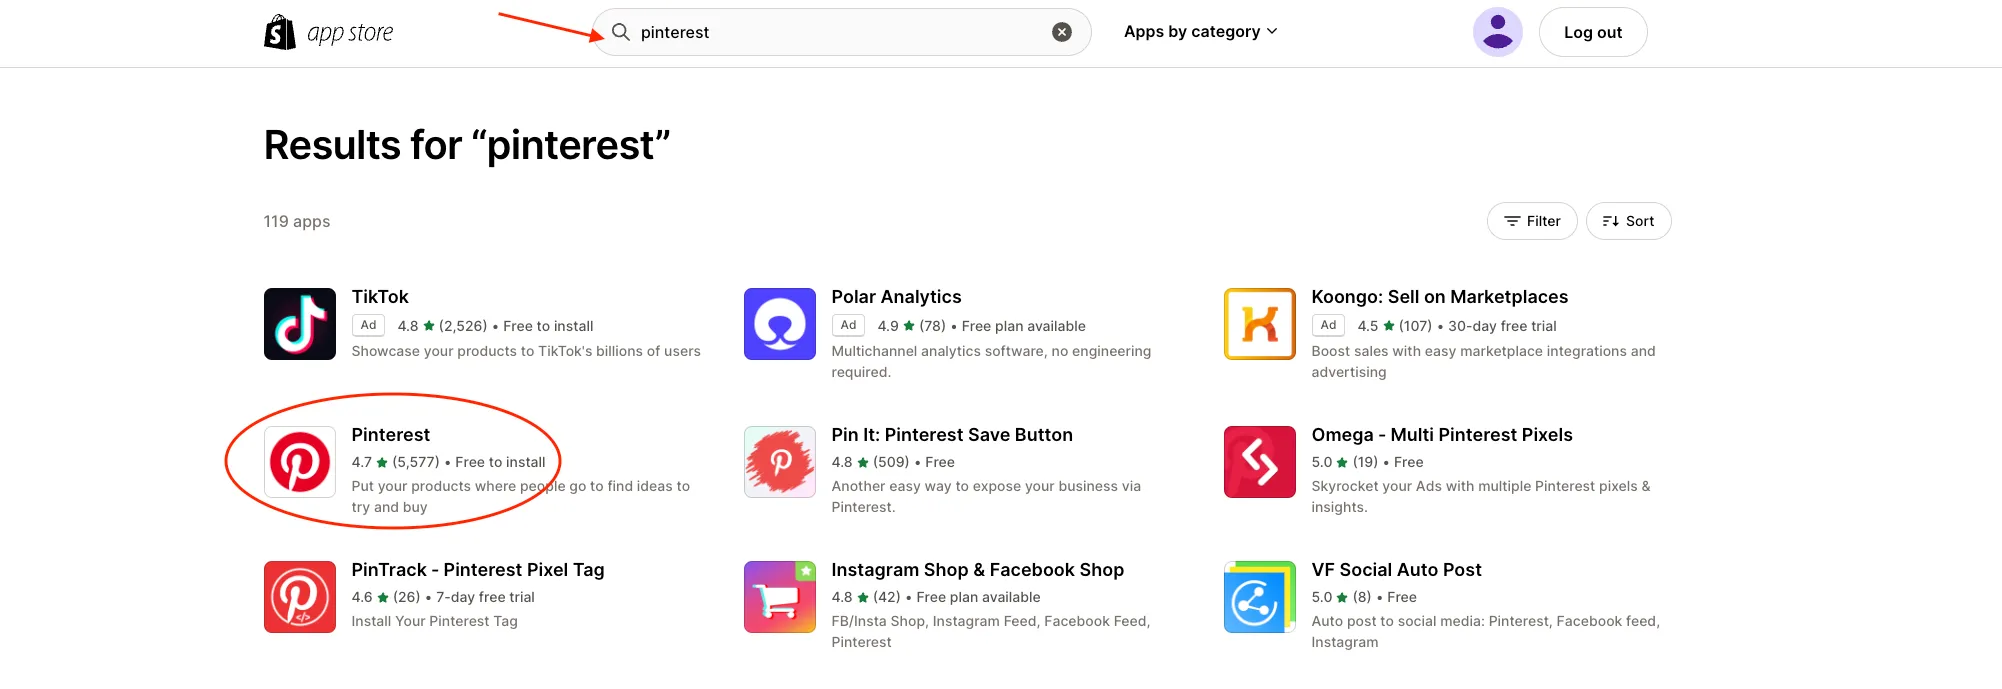 Pinterest official app on Shopify App Store